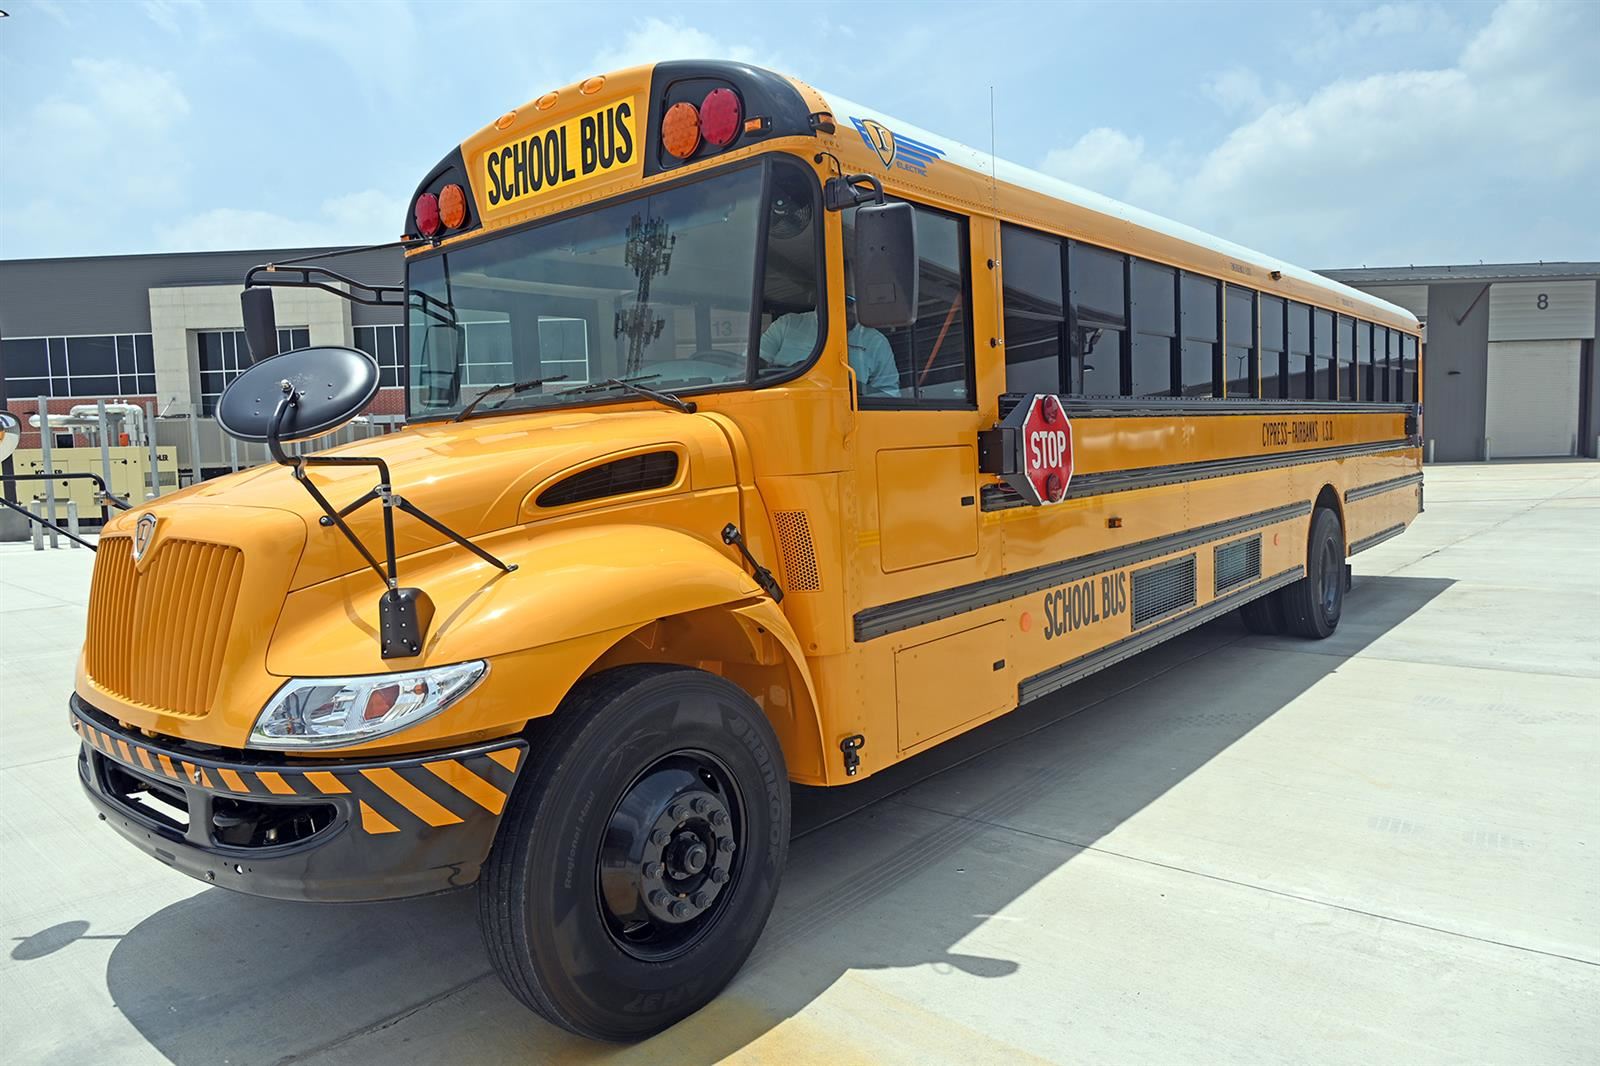 CFISD and the transportation department recently added 10 electric buses to their total fleet after being awarded a grant.